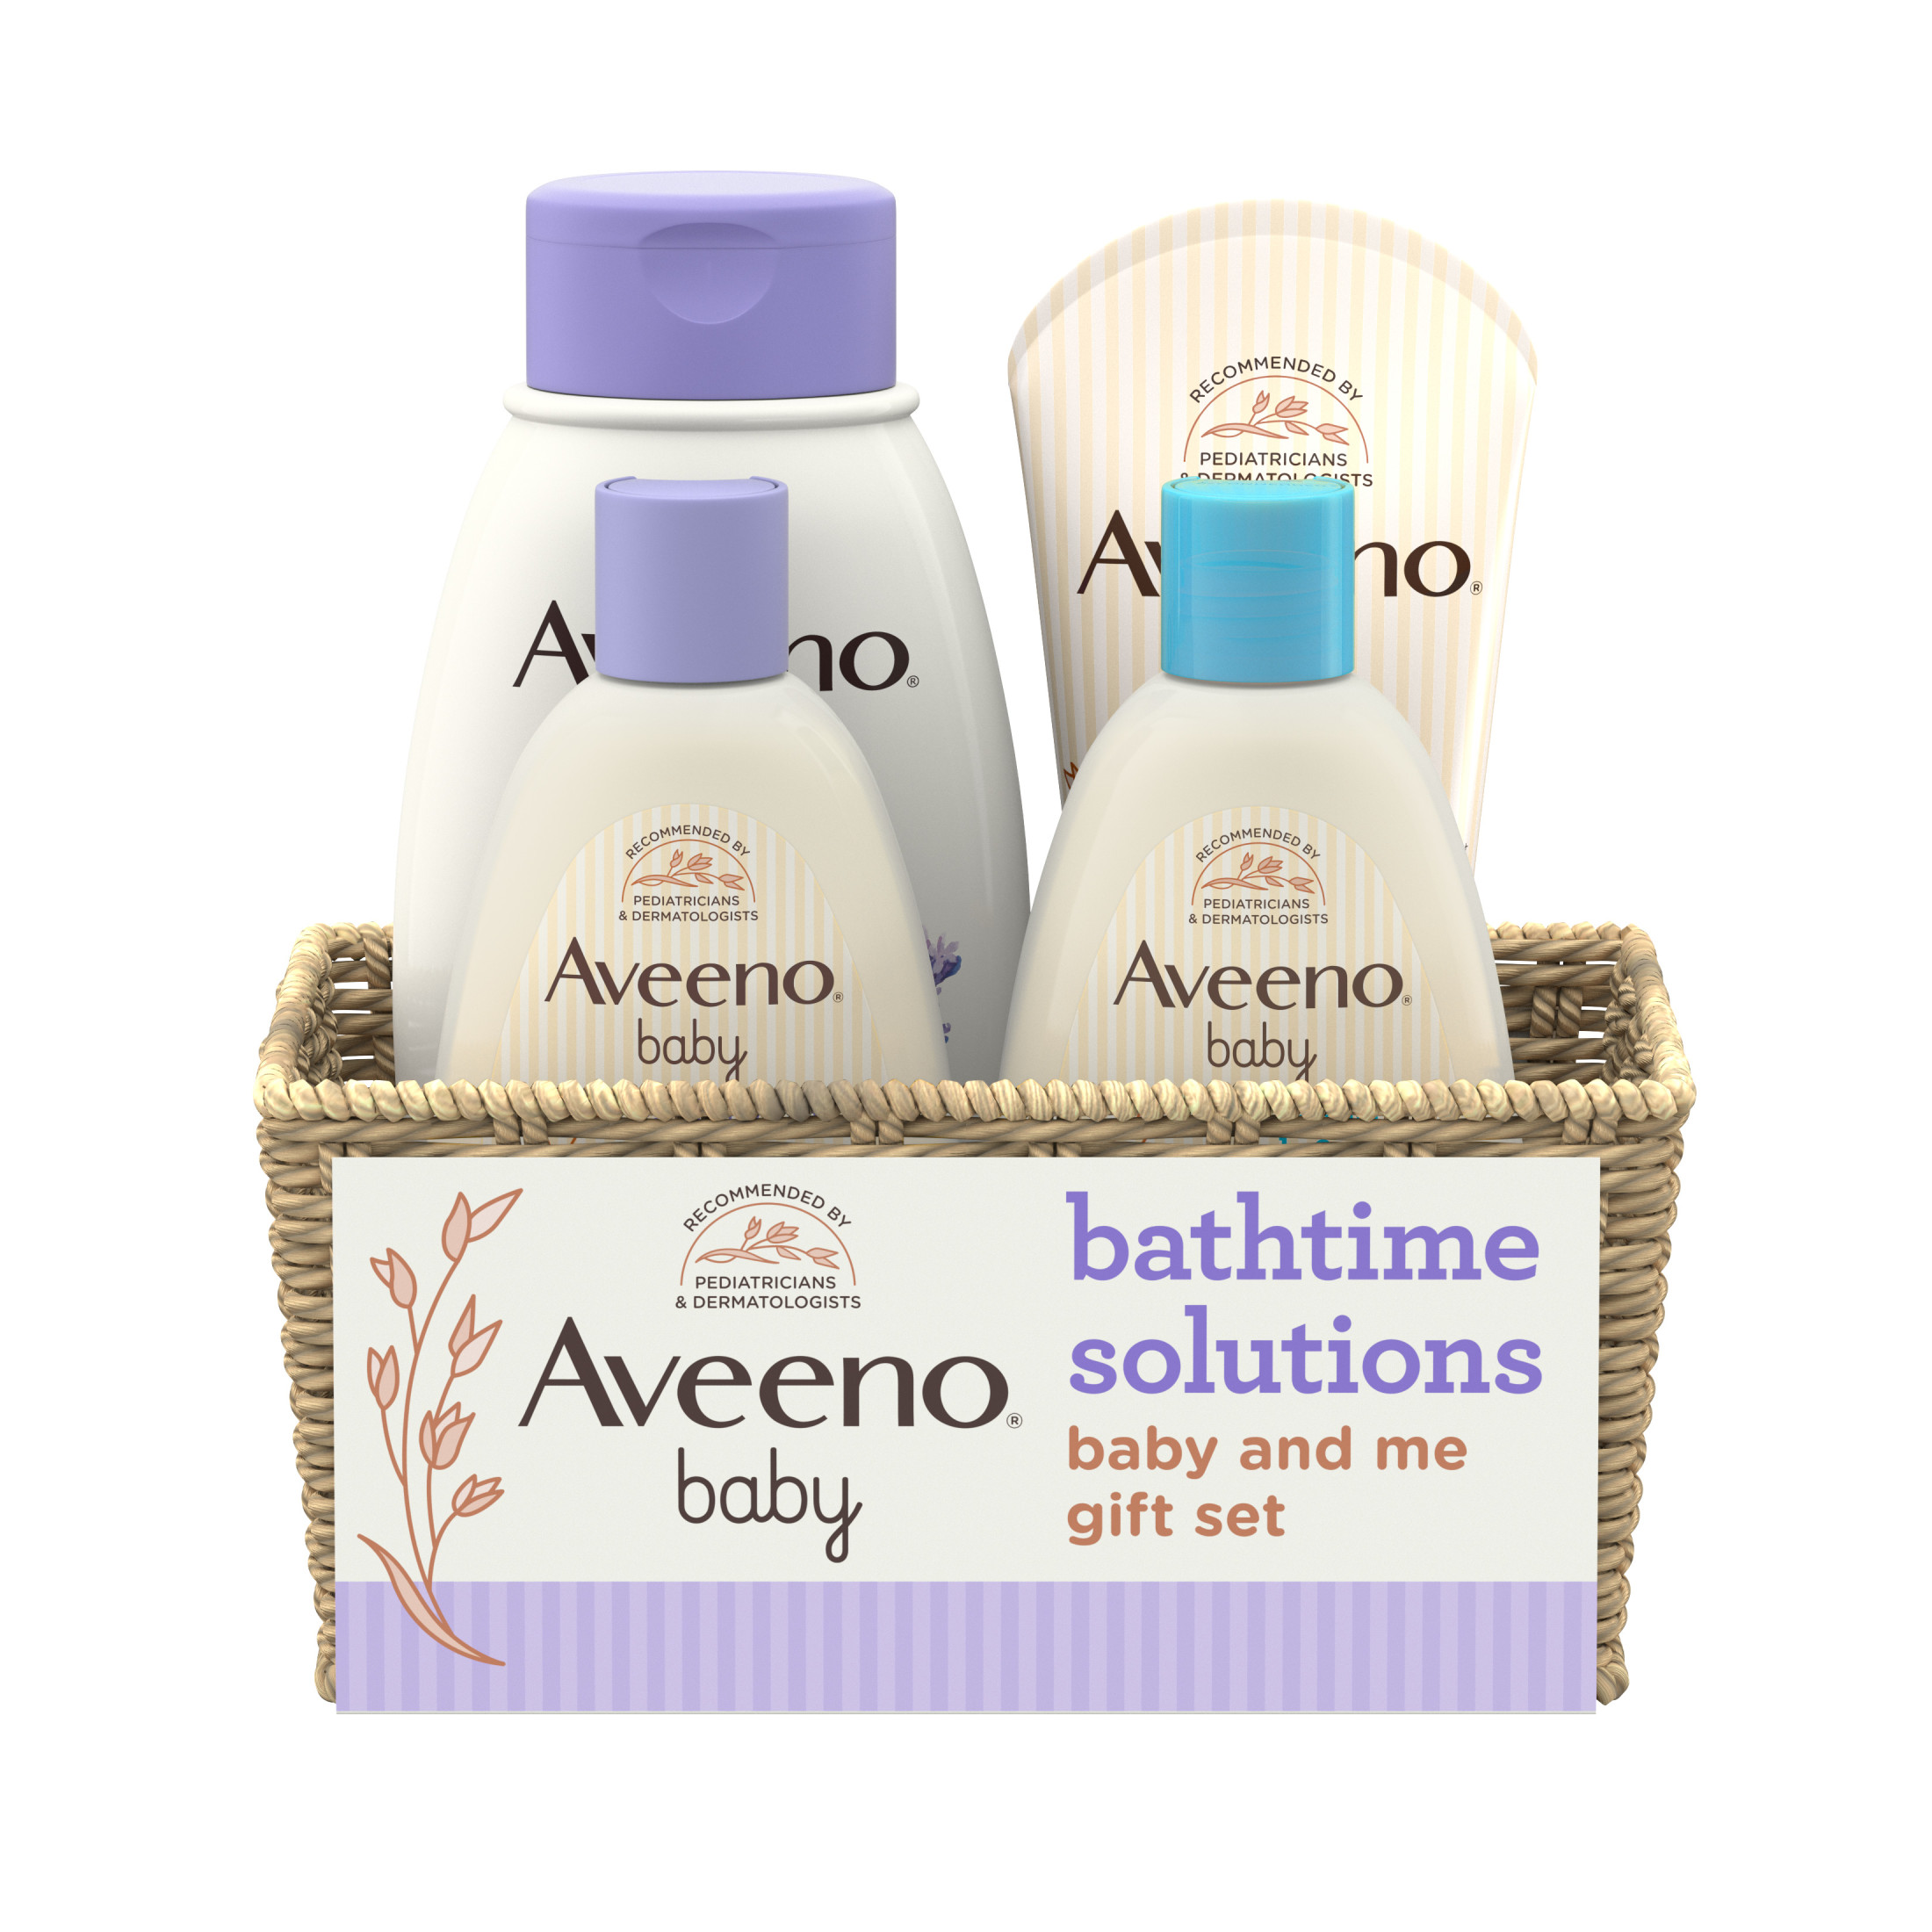 Aveeno Baby Daily Bathtime Solutions Baby & Me Gift Set, 4 items - image 1 of 9